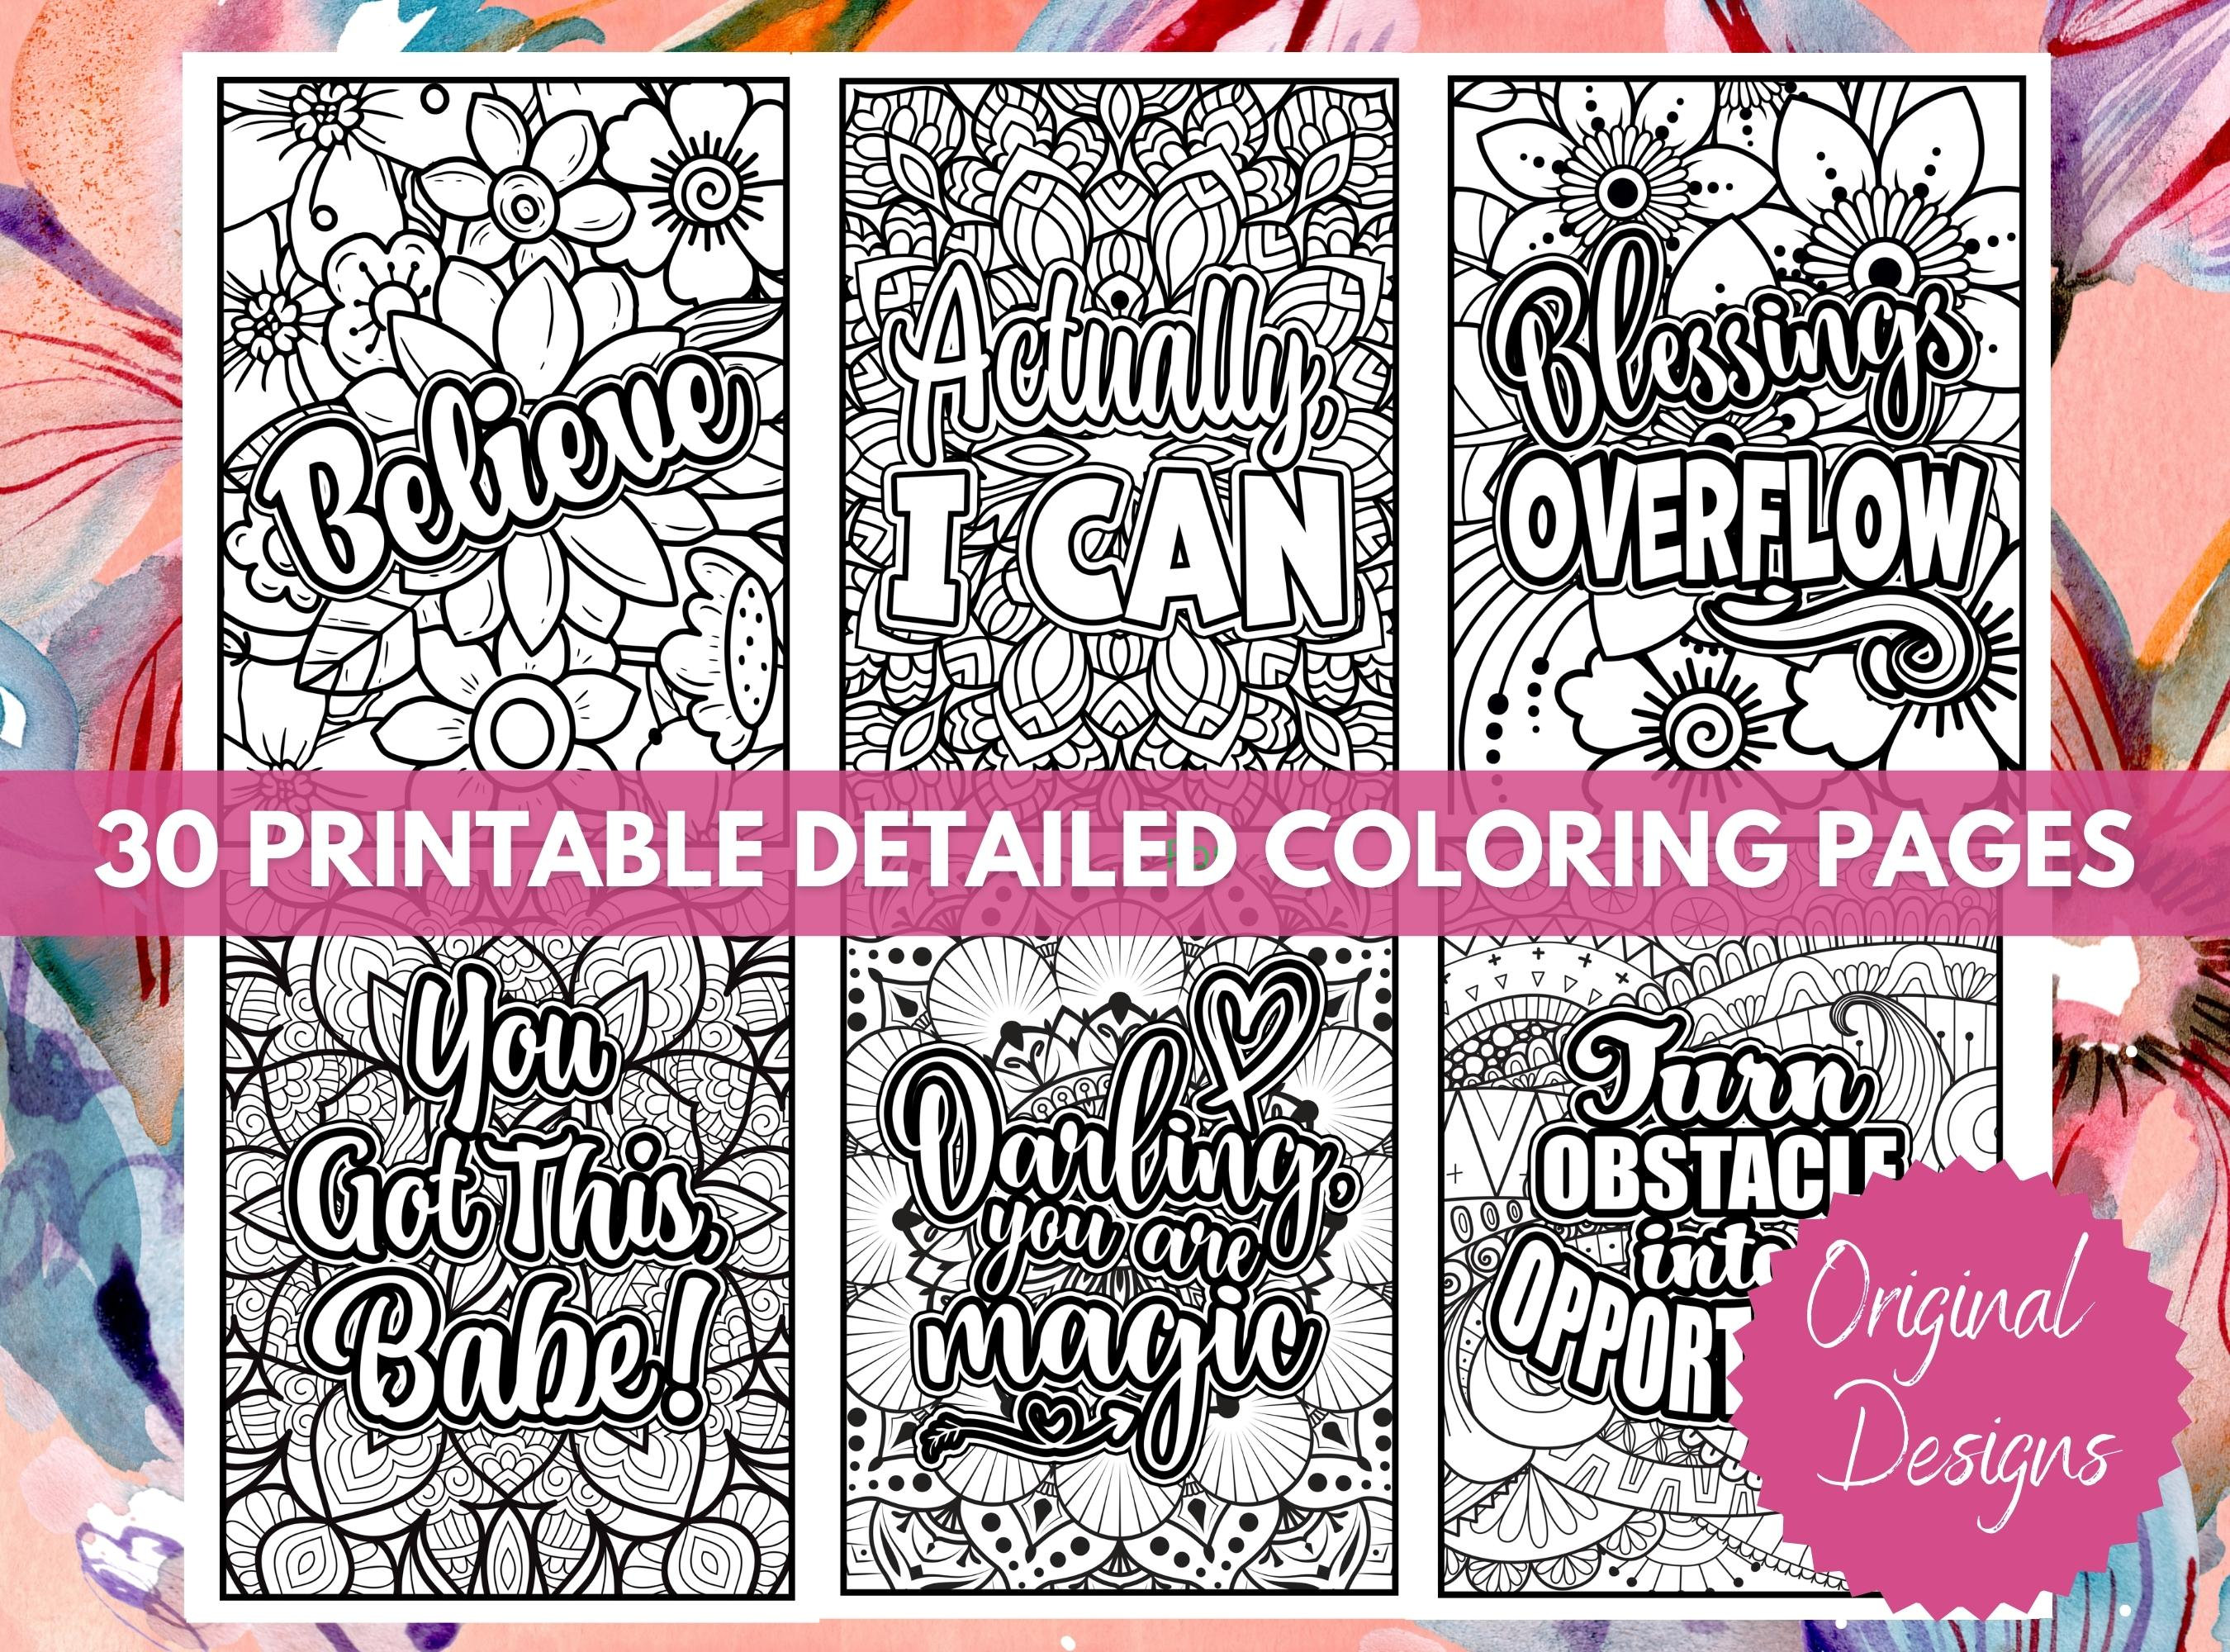 10 COLORING PAGES Dogs, Puppies, Funny, Cute, Adult Coloring Book Animal  Designs, Self Care Quotes Printable PDF Instant Download 